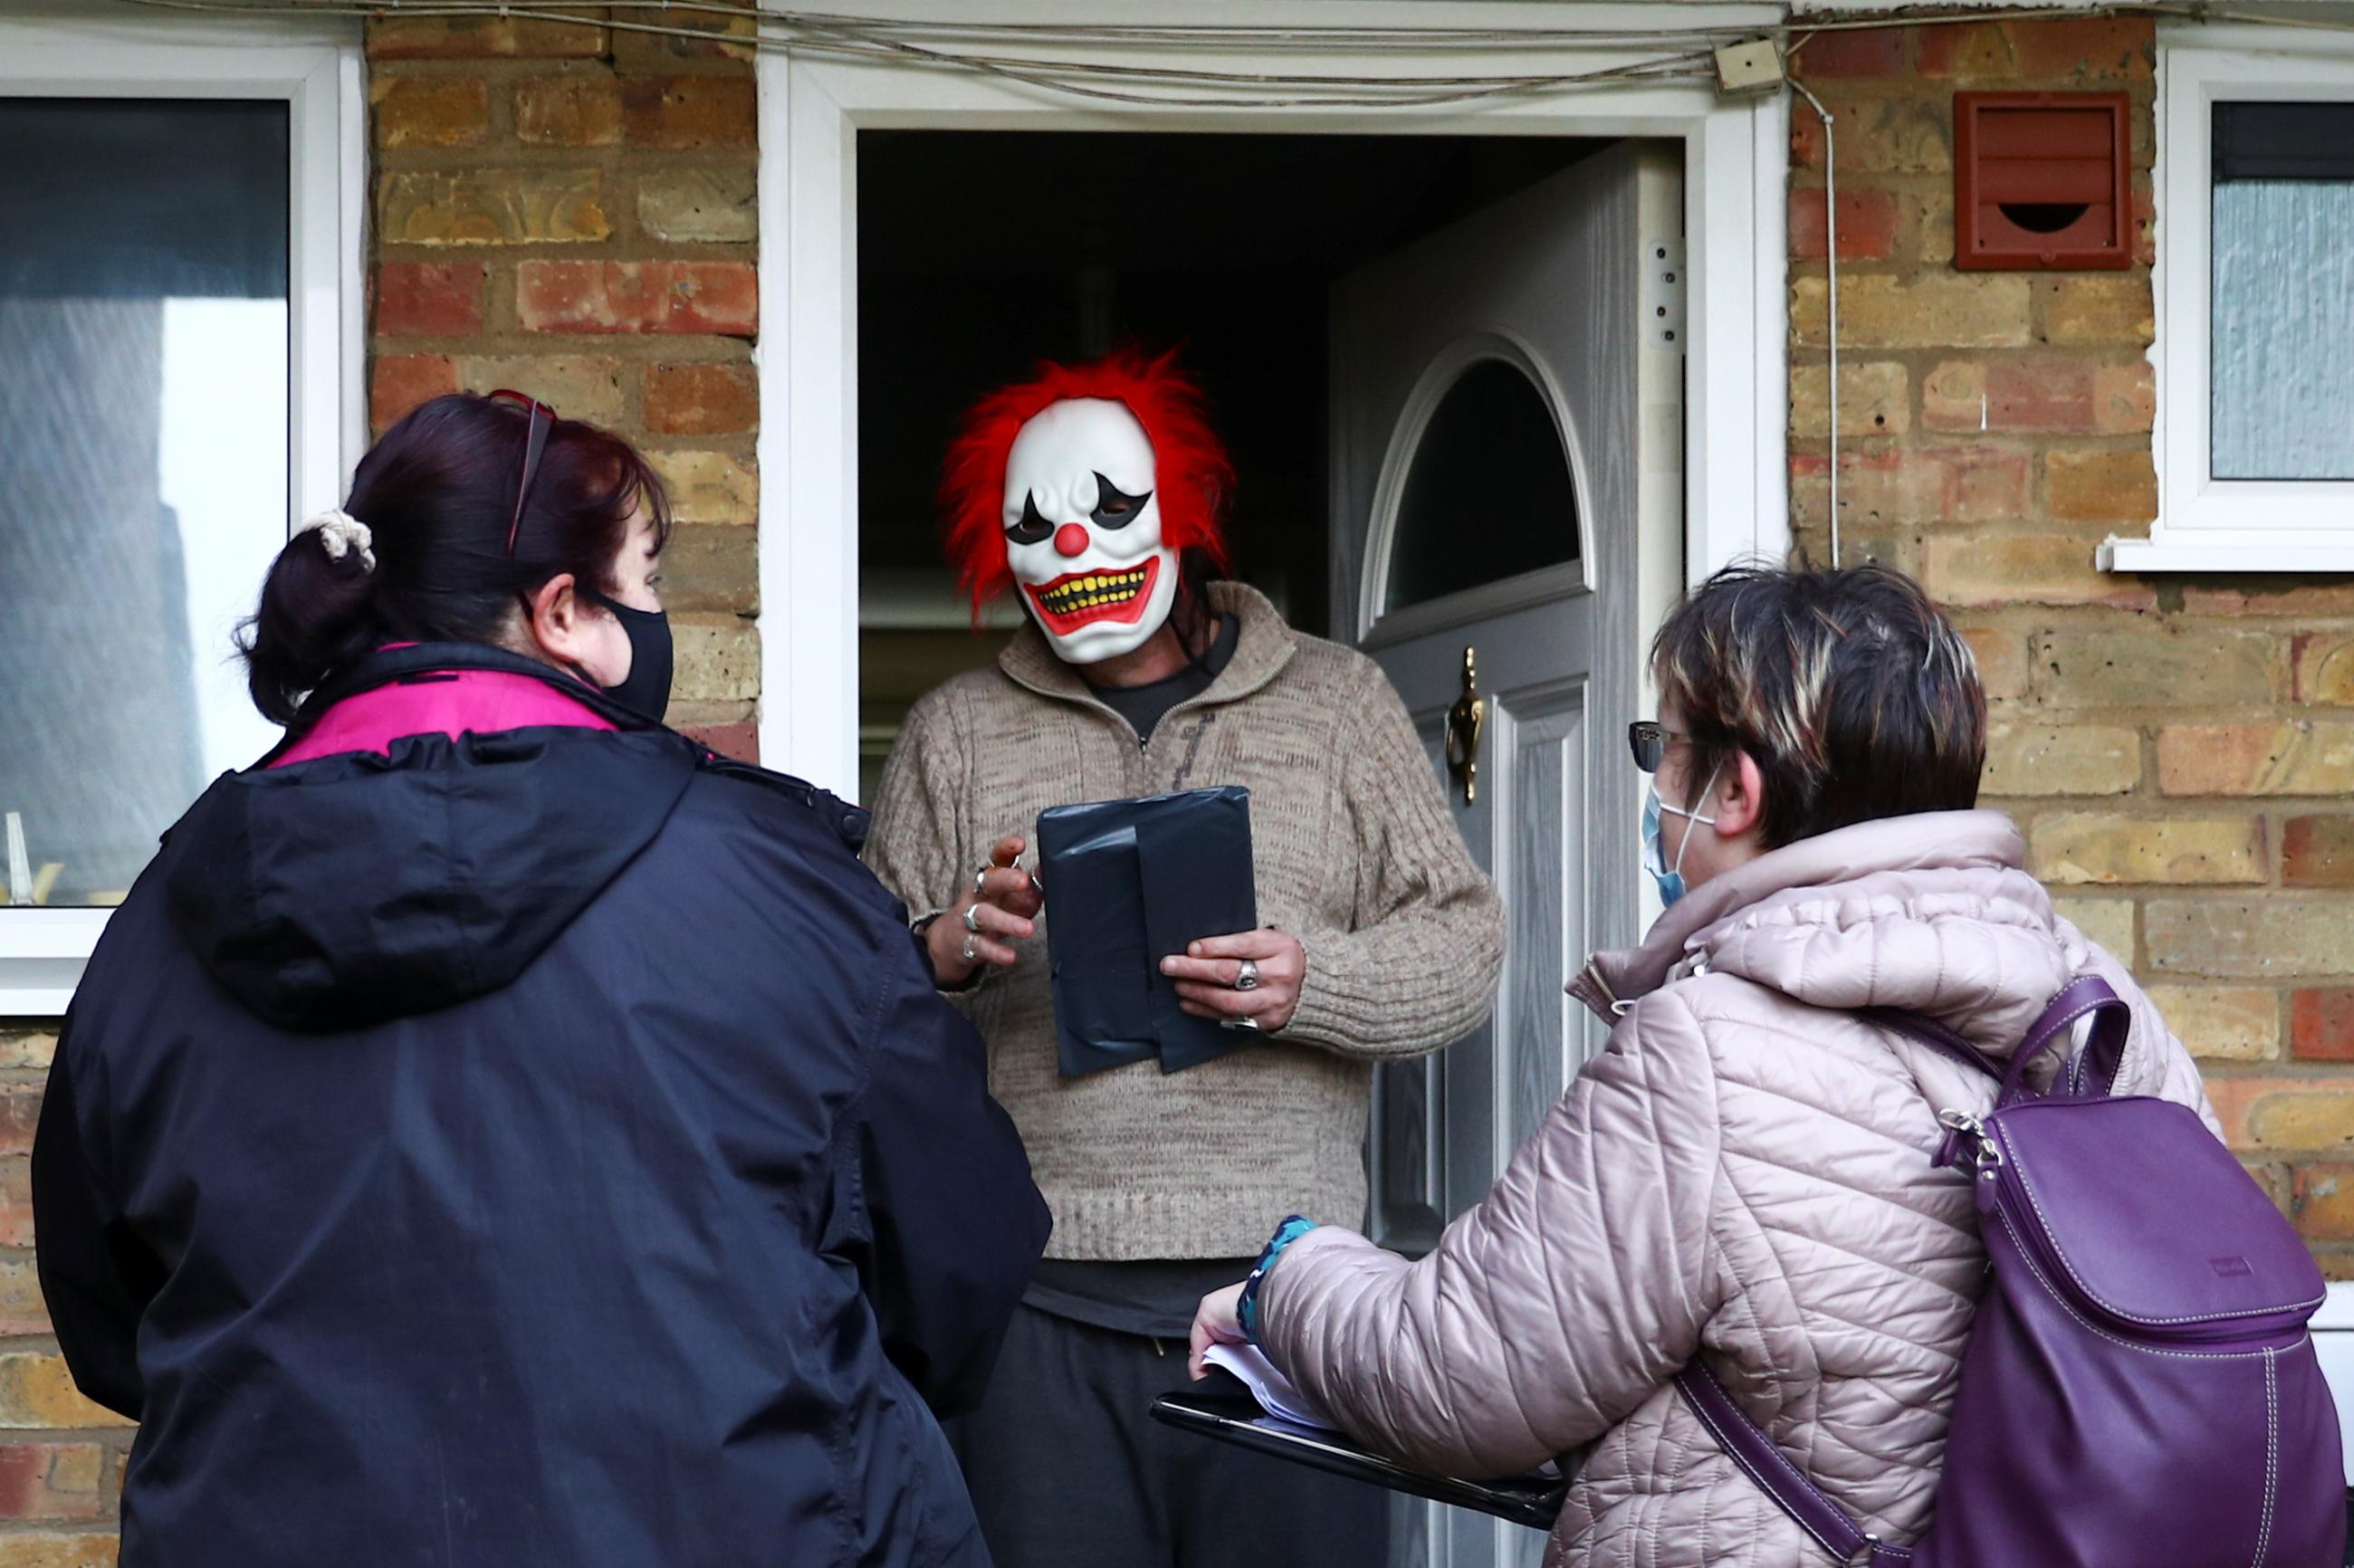 Volunteers hand out the COVID-19 home test kits to residents, in Goldsworth and St Johns, amid the outbreak of coronavirus disease (COVID-19) in Woking, Britain, February 2, 2021.